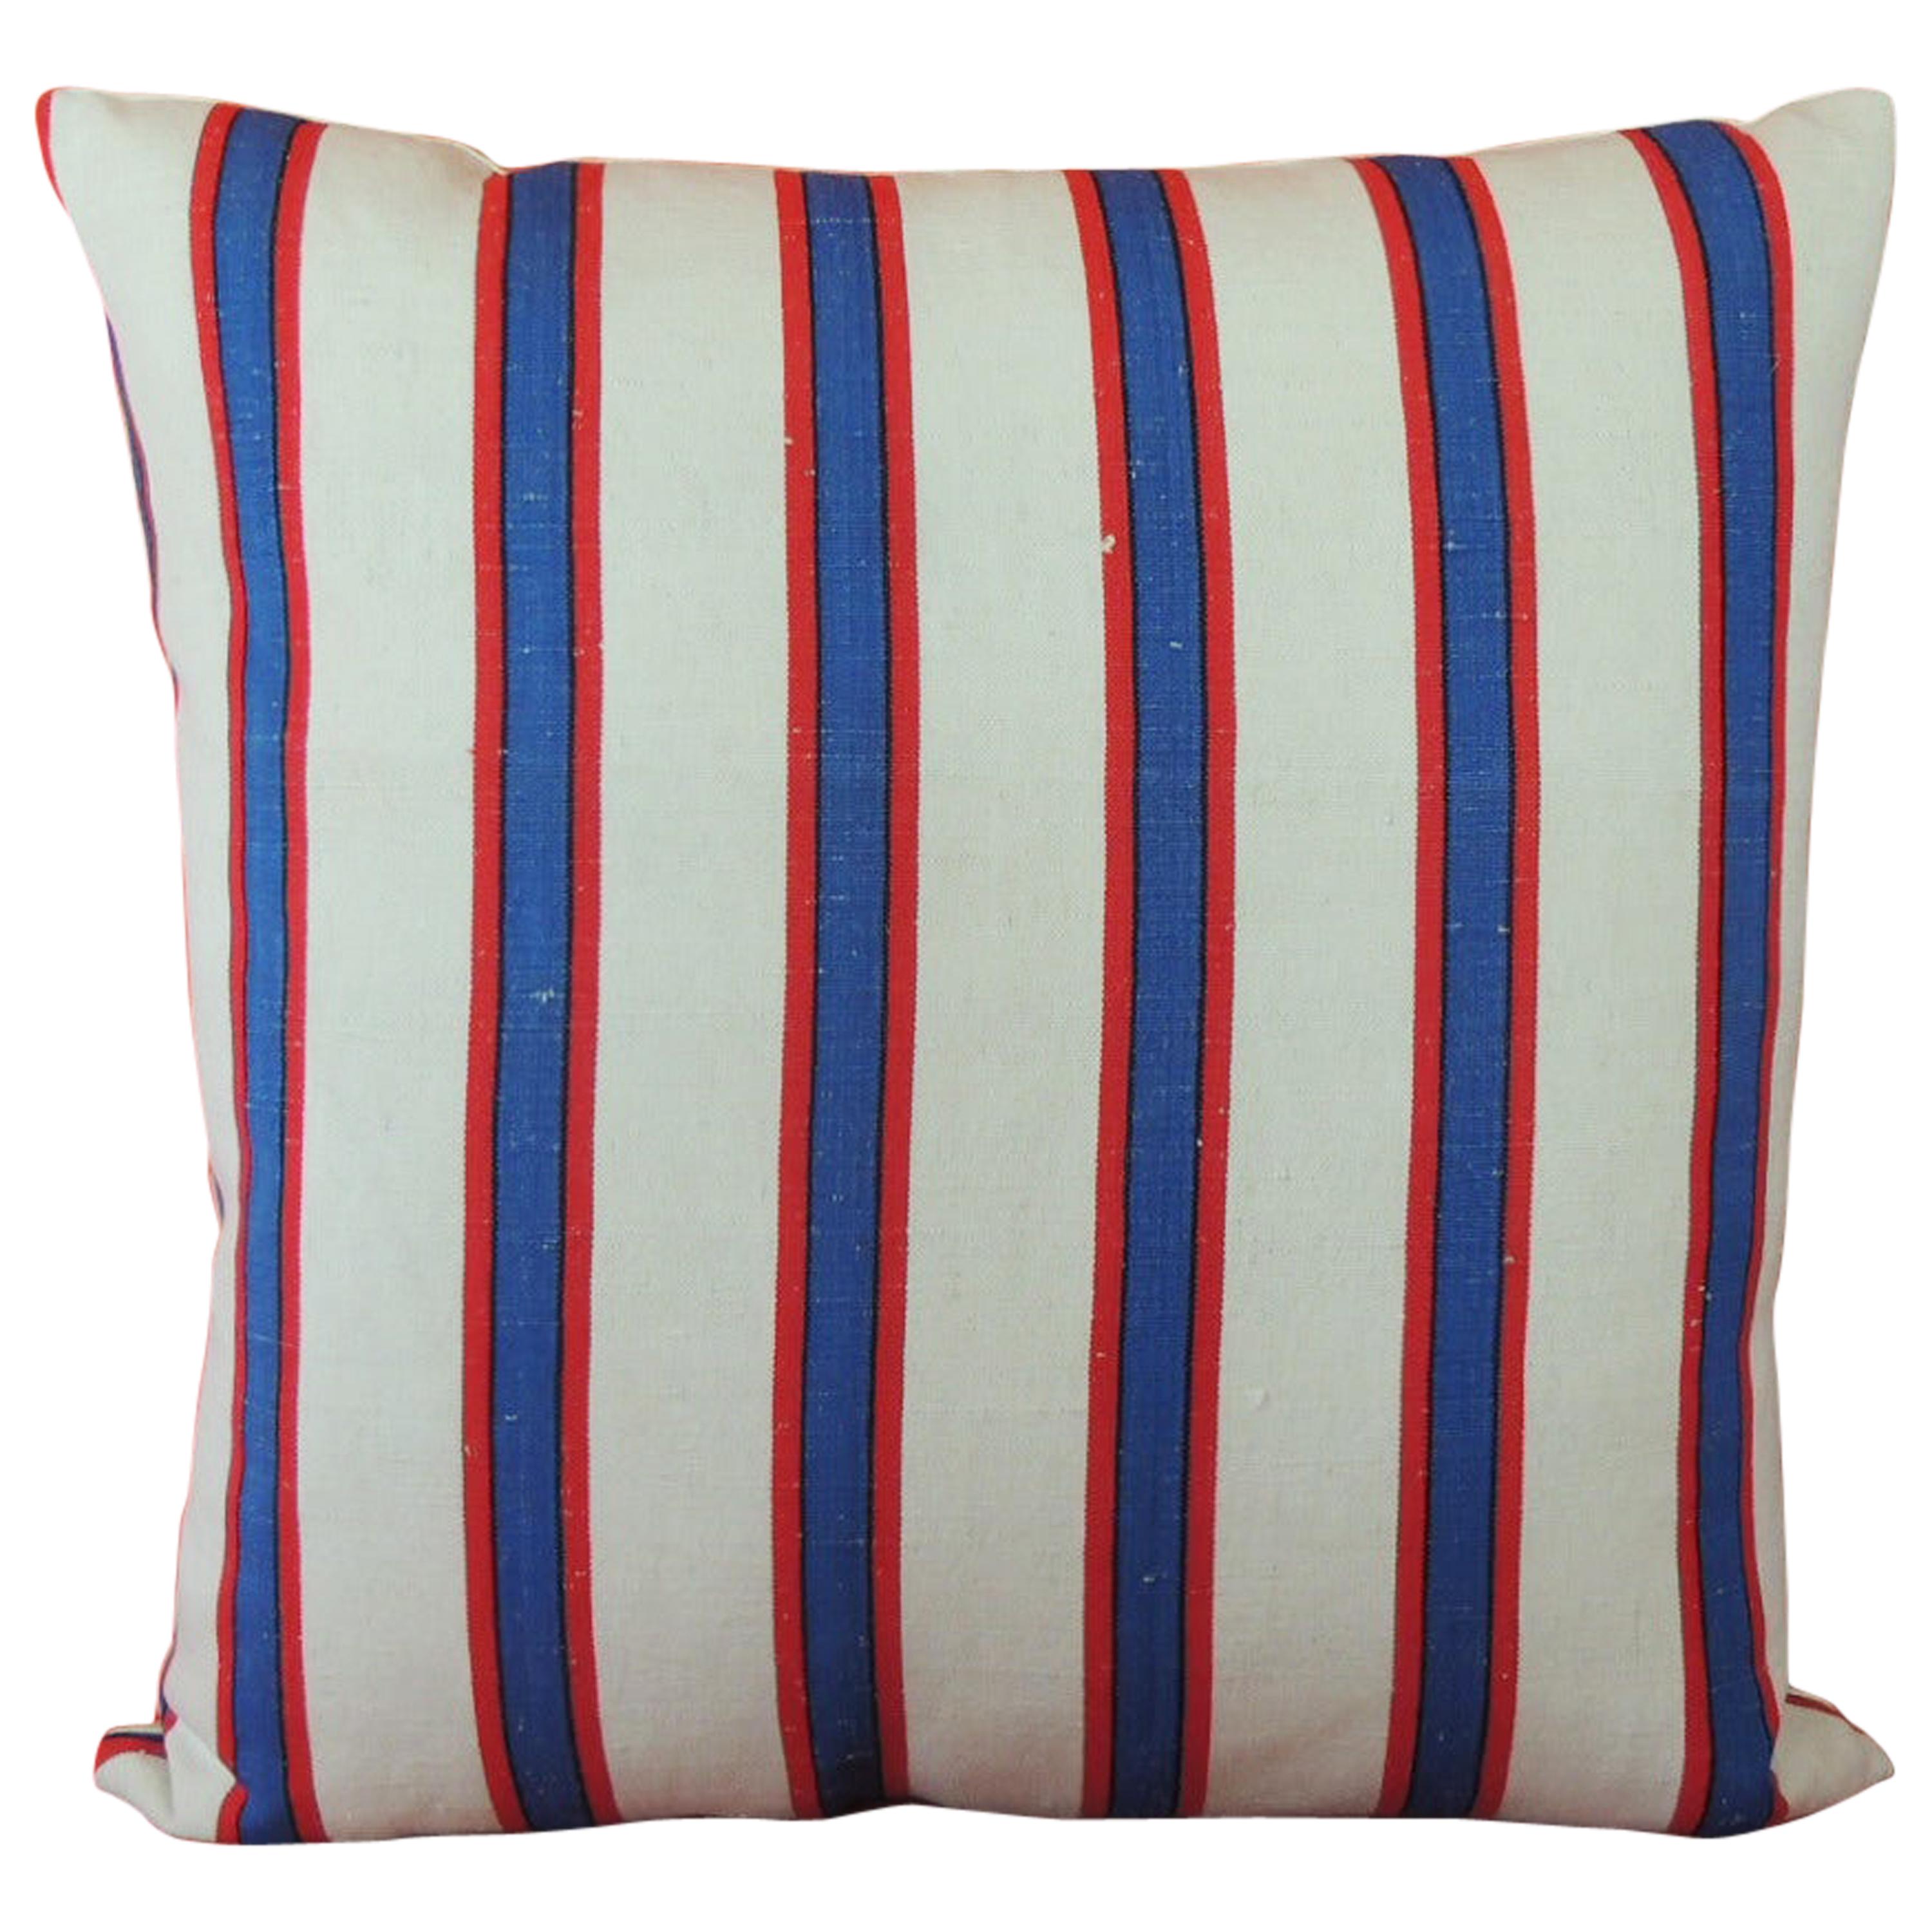 Vintage French Blue and Red Stripes Decorative Pillow